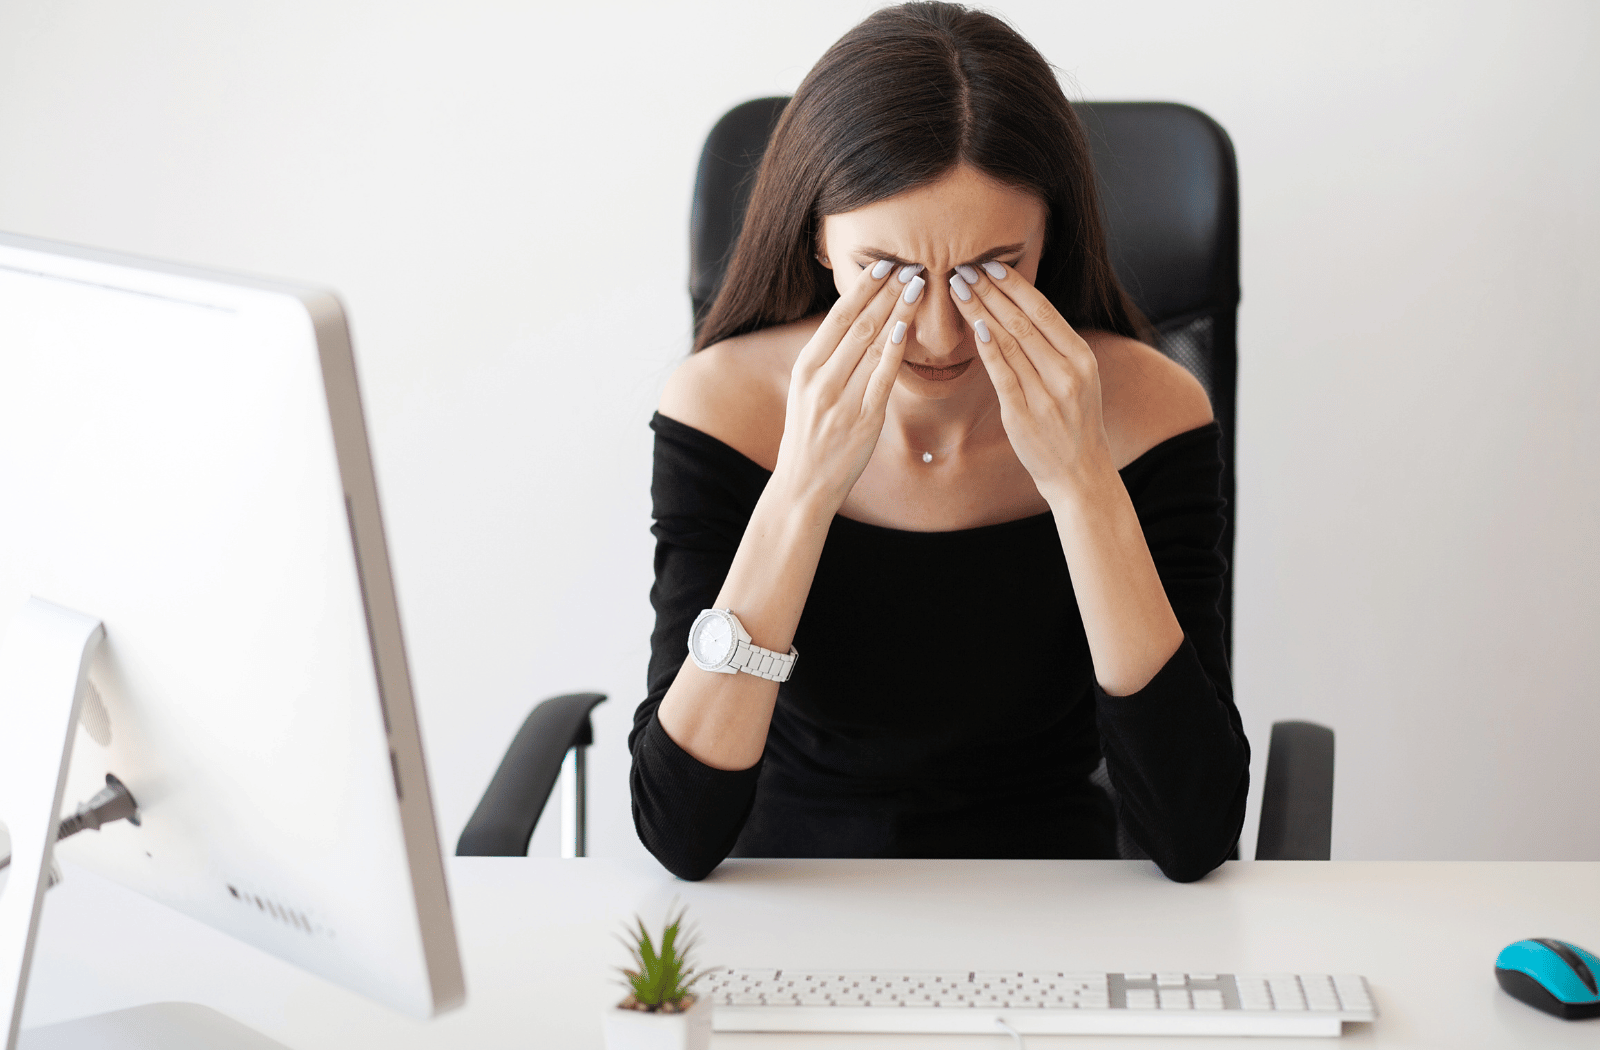 A woman rubbing her strained and dry eyes while sitting at her desk